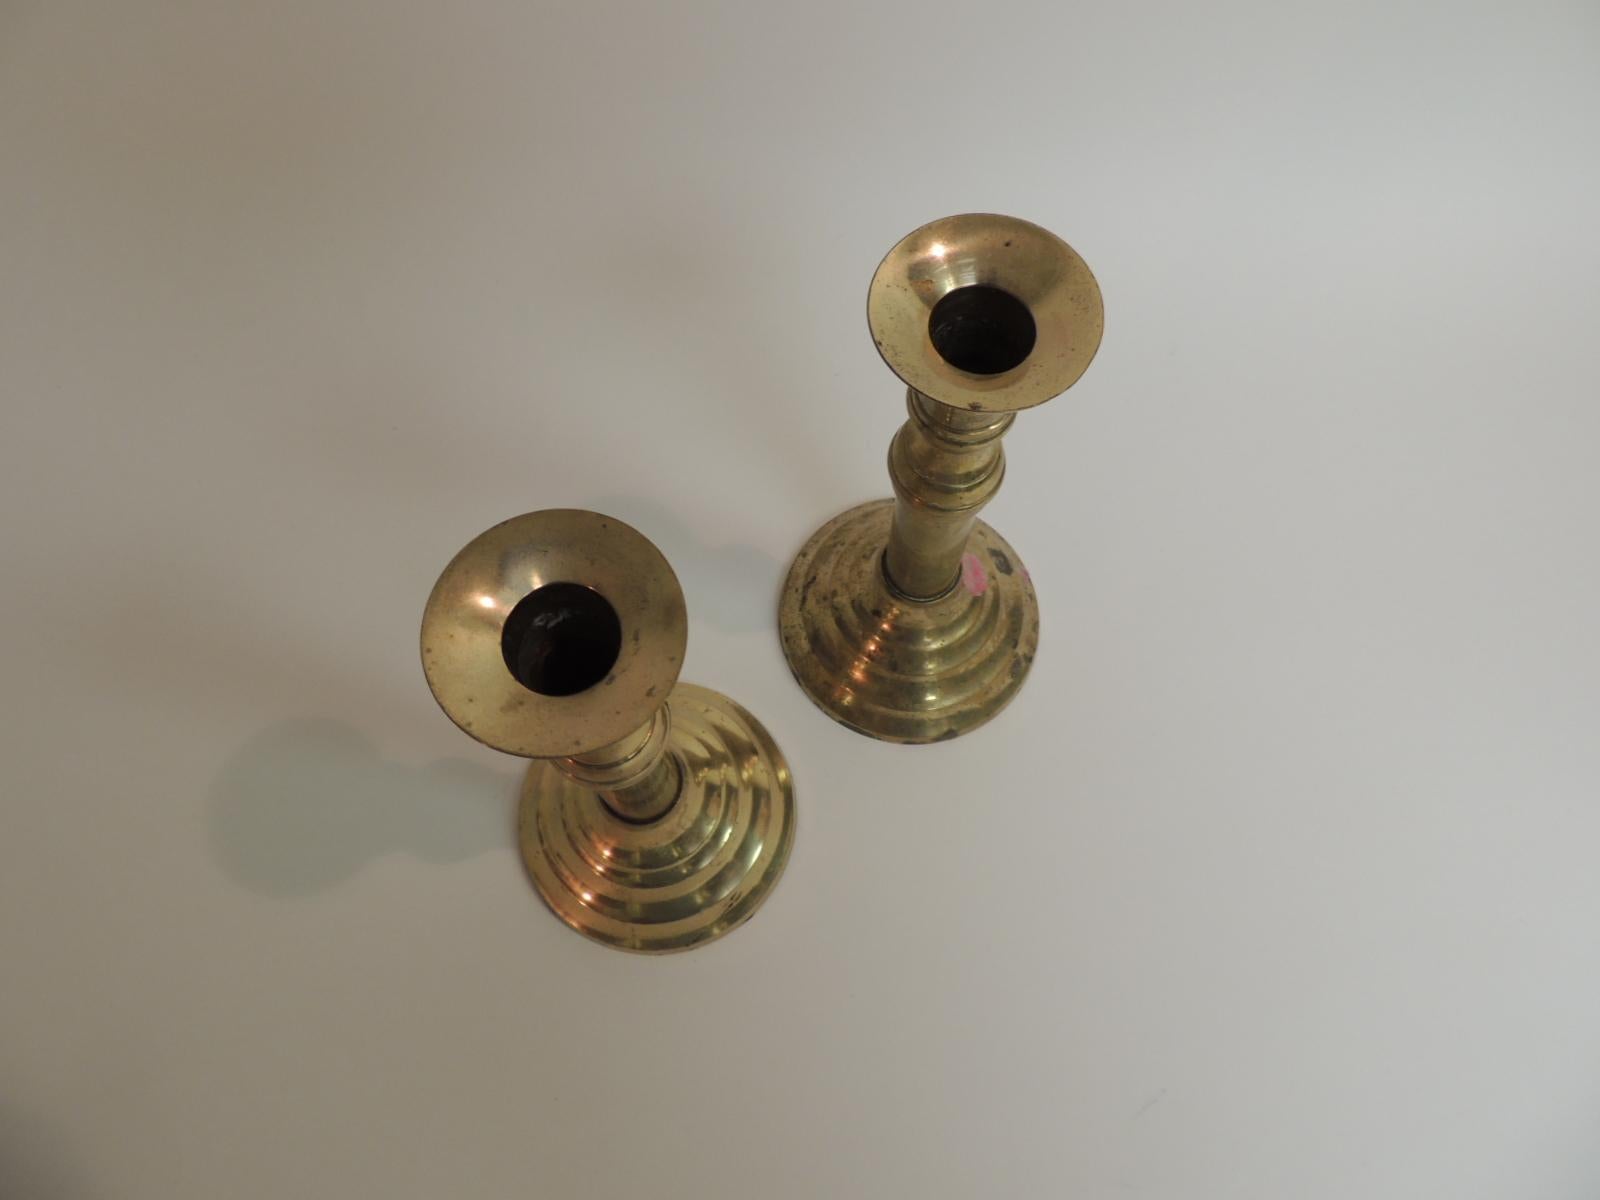 Pair of brass candle holders, round base with round pillar steams.
Polished brass. Felt covered bottoms.
Size: 4 D x 8 H,
1980s.